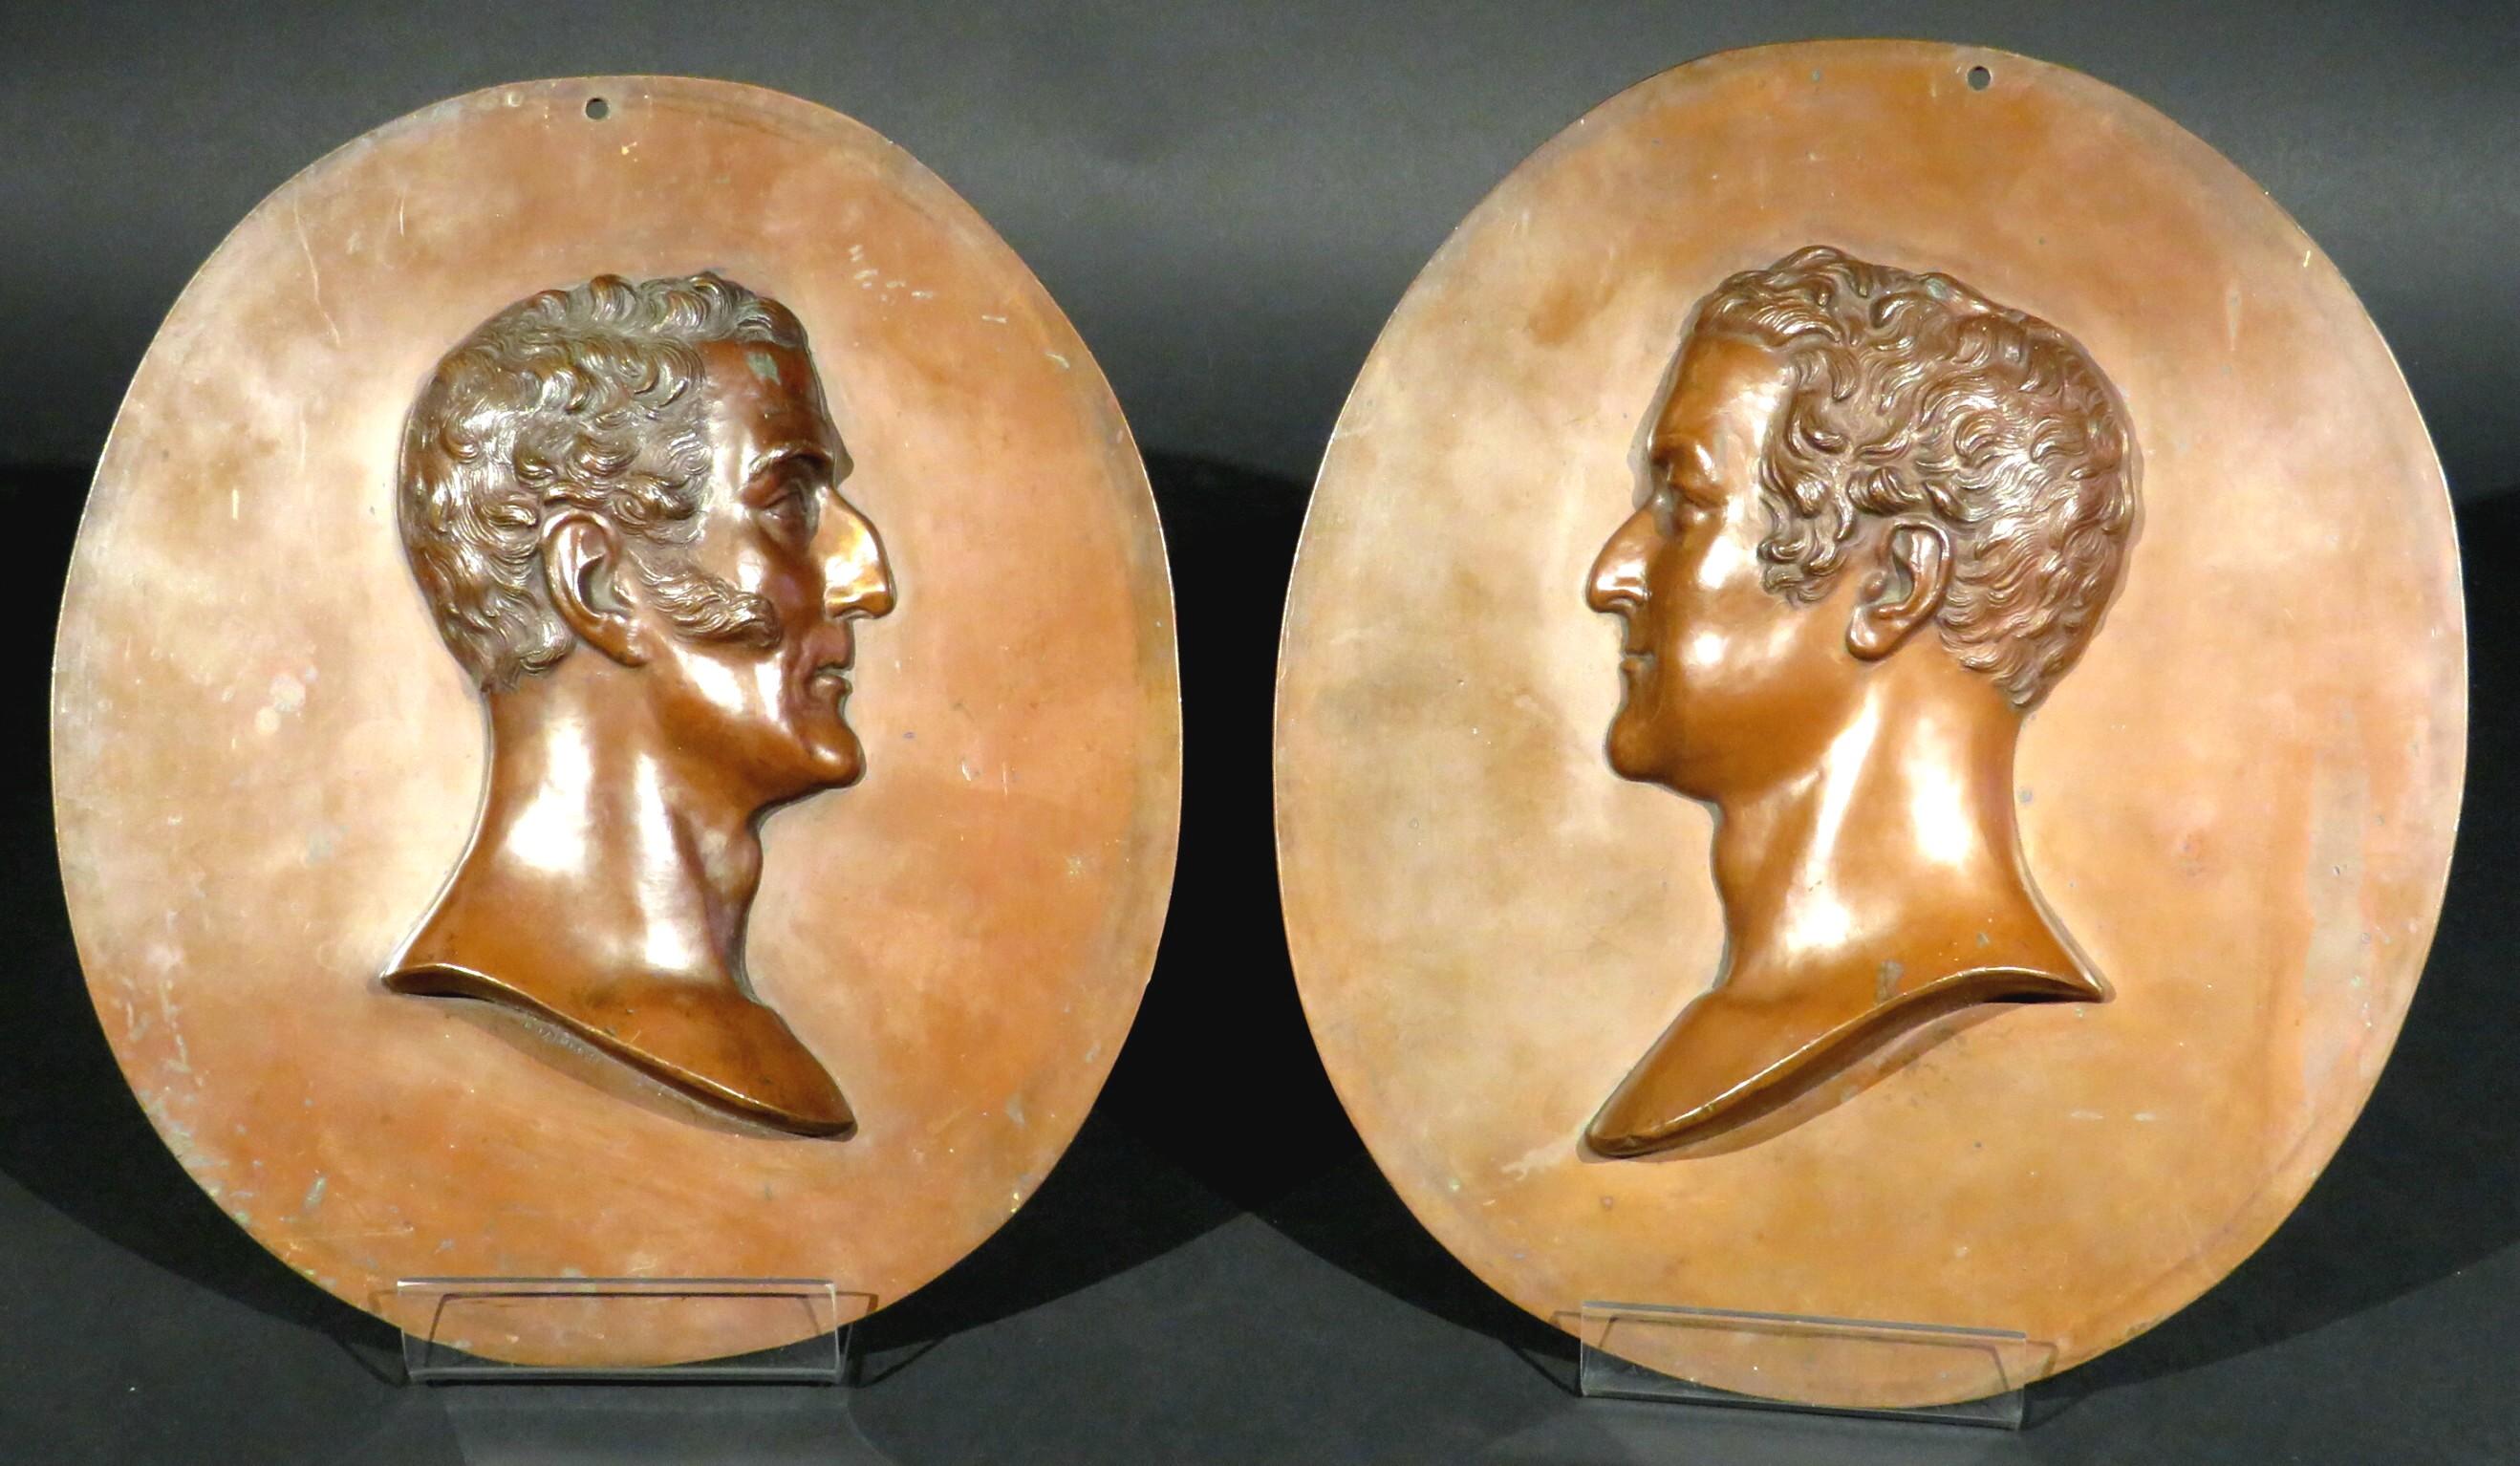 A very handsome and impressive pair of relief portrait busts in copper depicting portrait busts of Arthur Wellesley, 1st Duke of Wellington (1769-1852) on the left, and Napoleon Bonaparte (1769-1821) on the right. Dimensions of each are: